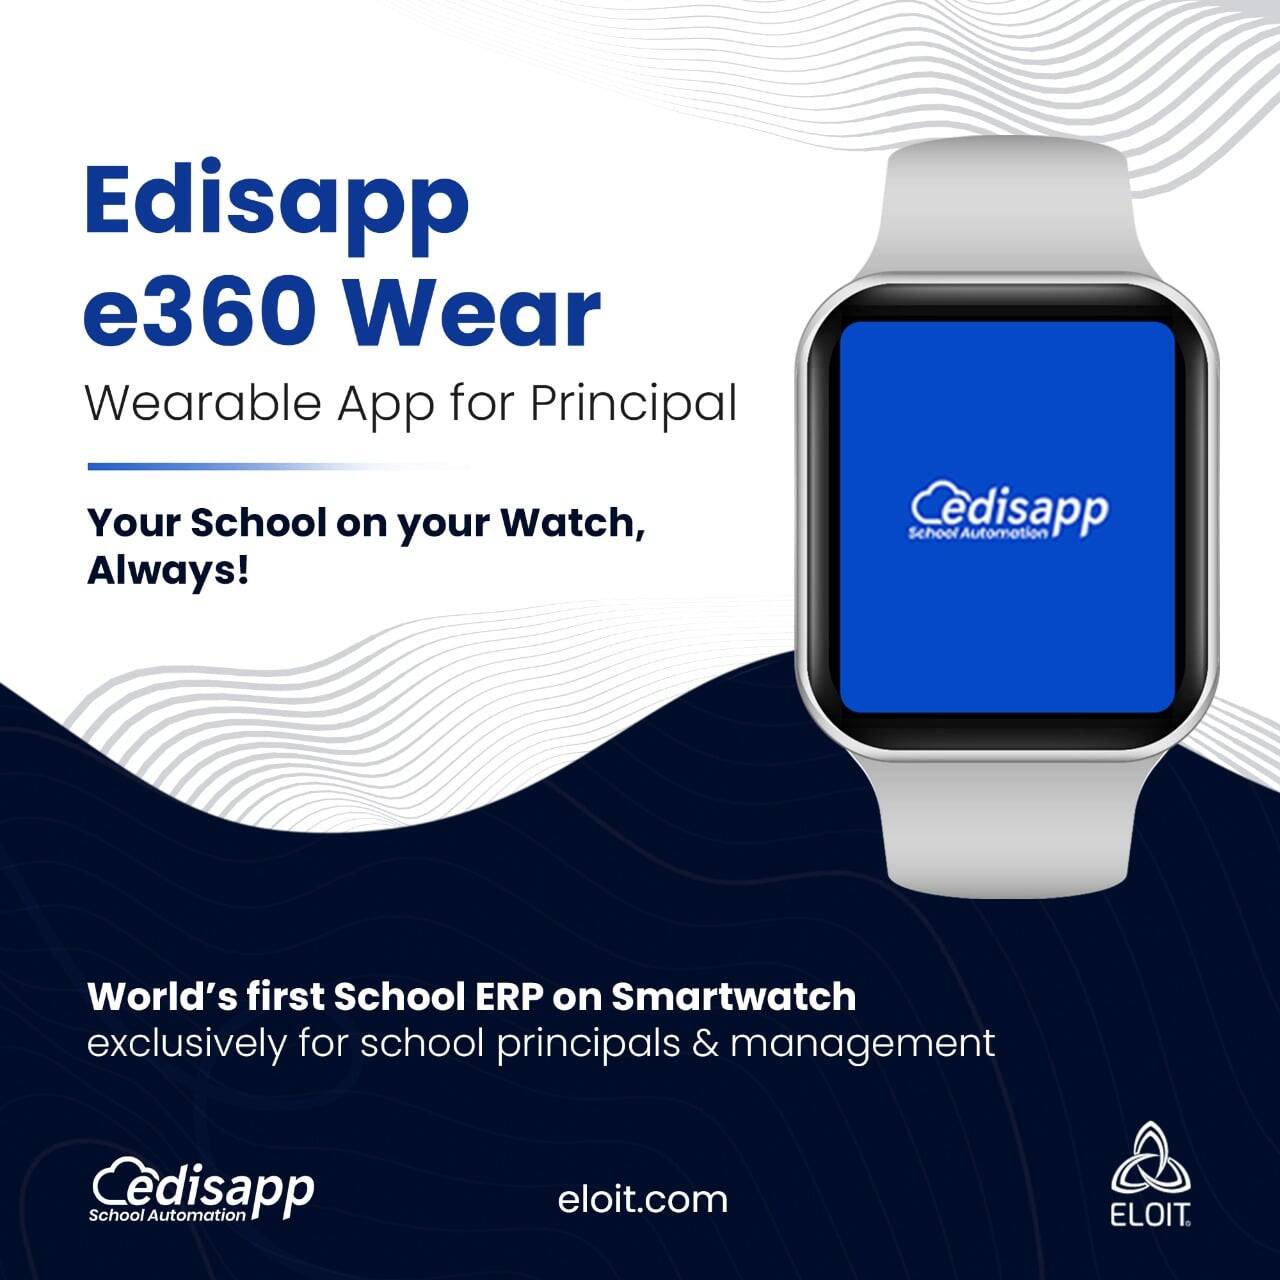 World’s first school ERP on a smartwatch for school principals and decision-makers